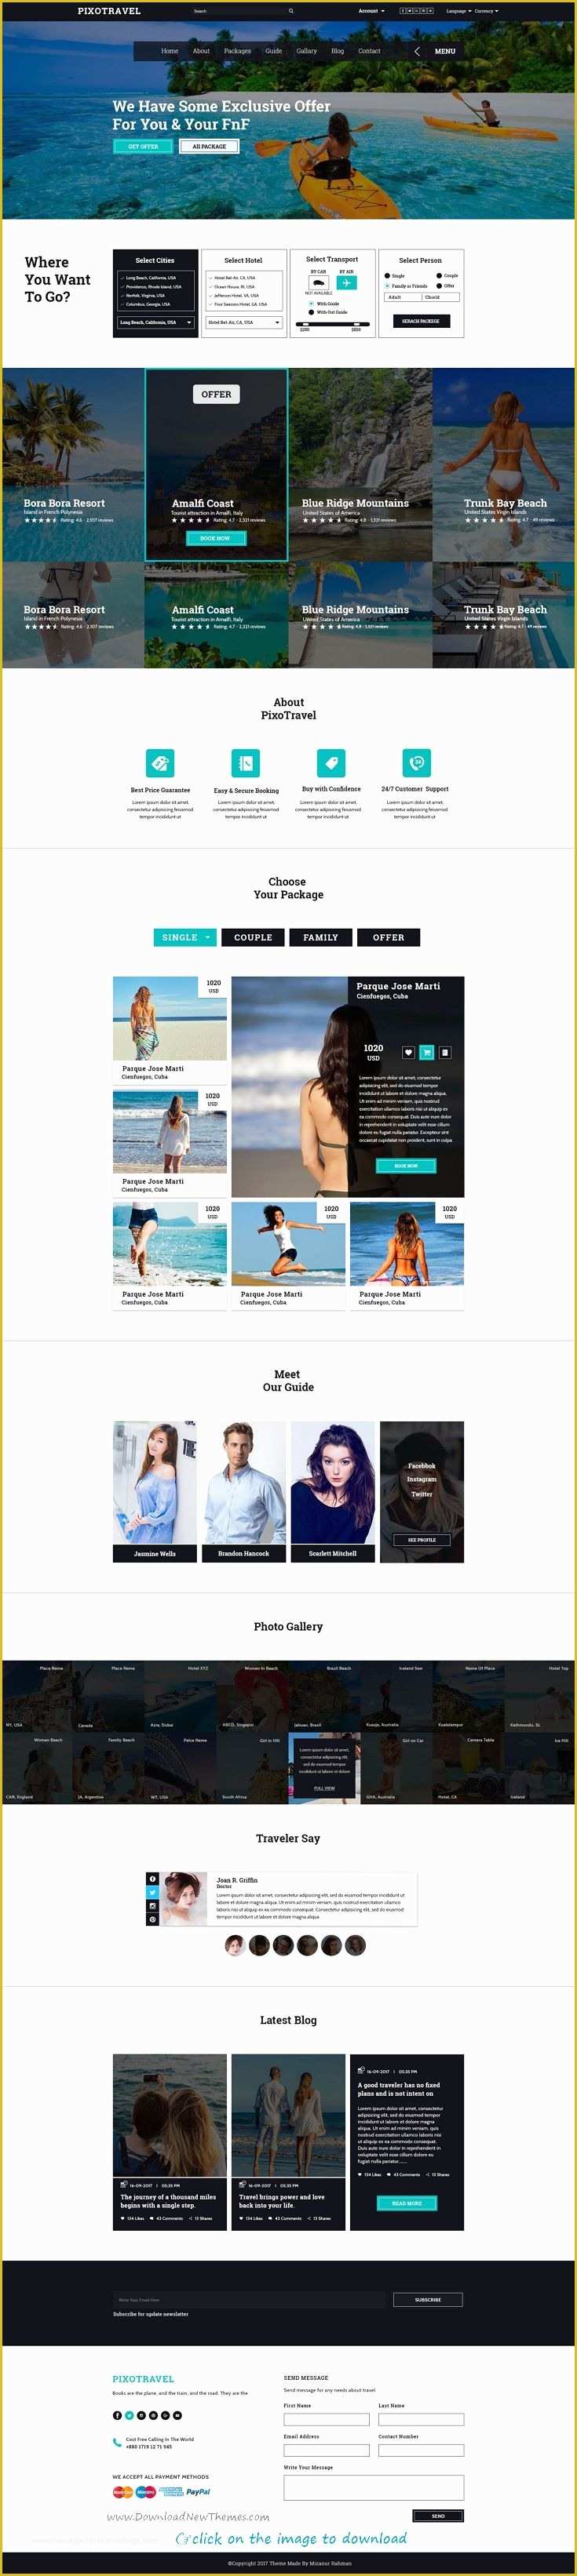 Travel Booking Website Templates Free Download Of Best 25 Travel Agency Ideas On Pinterest